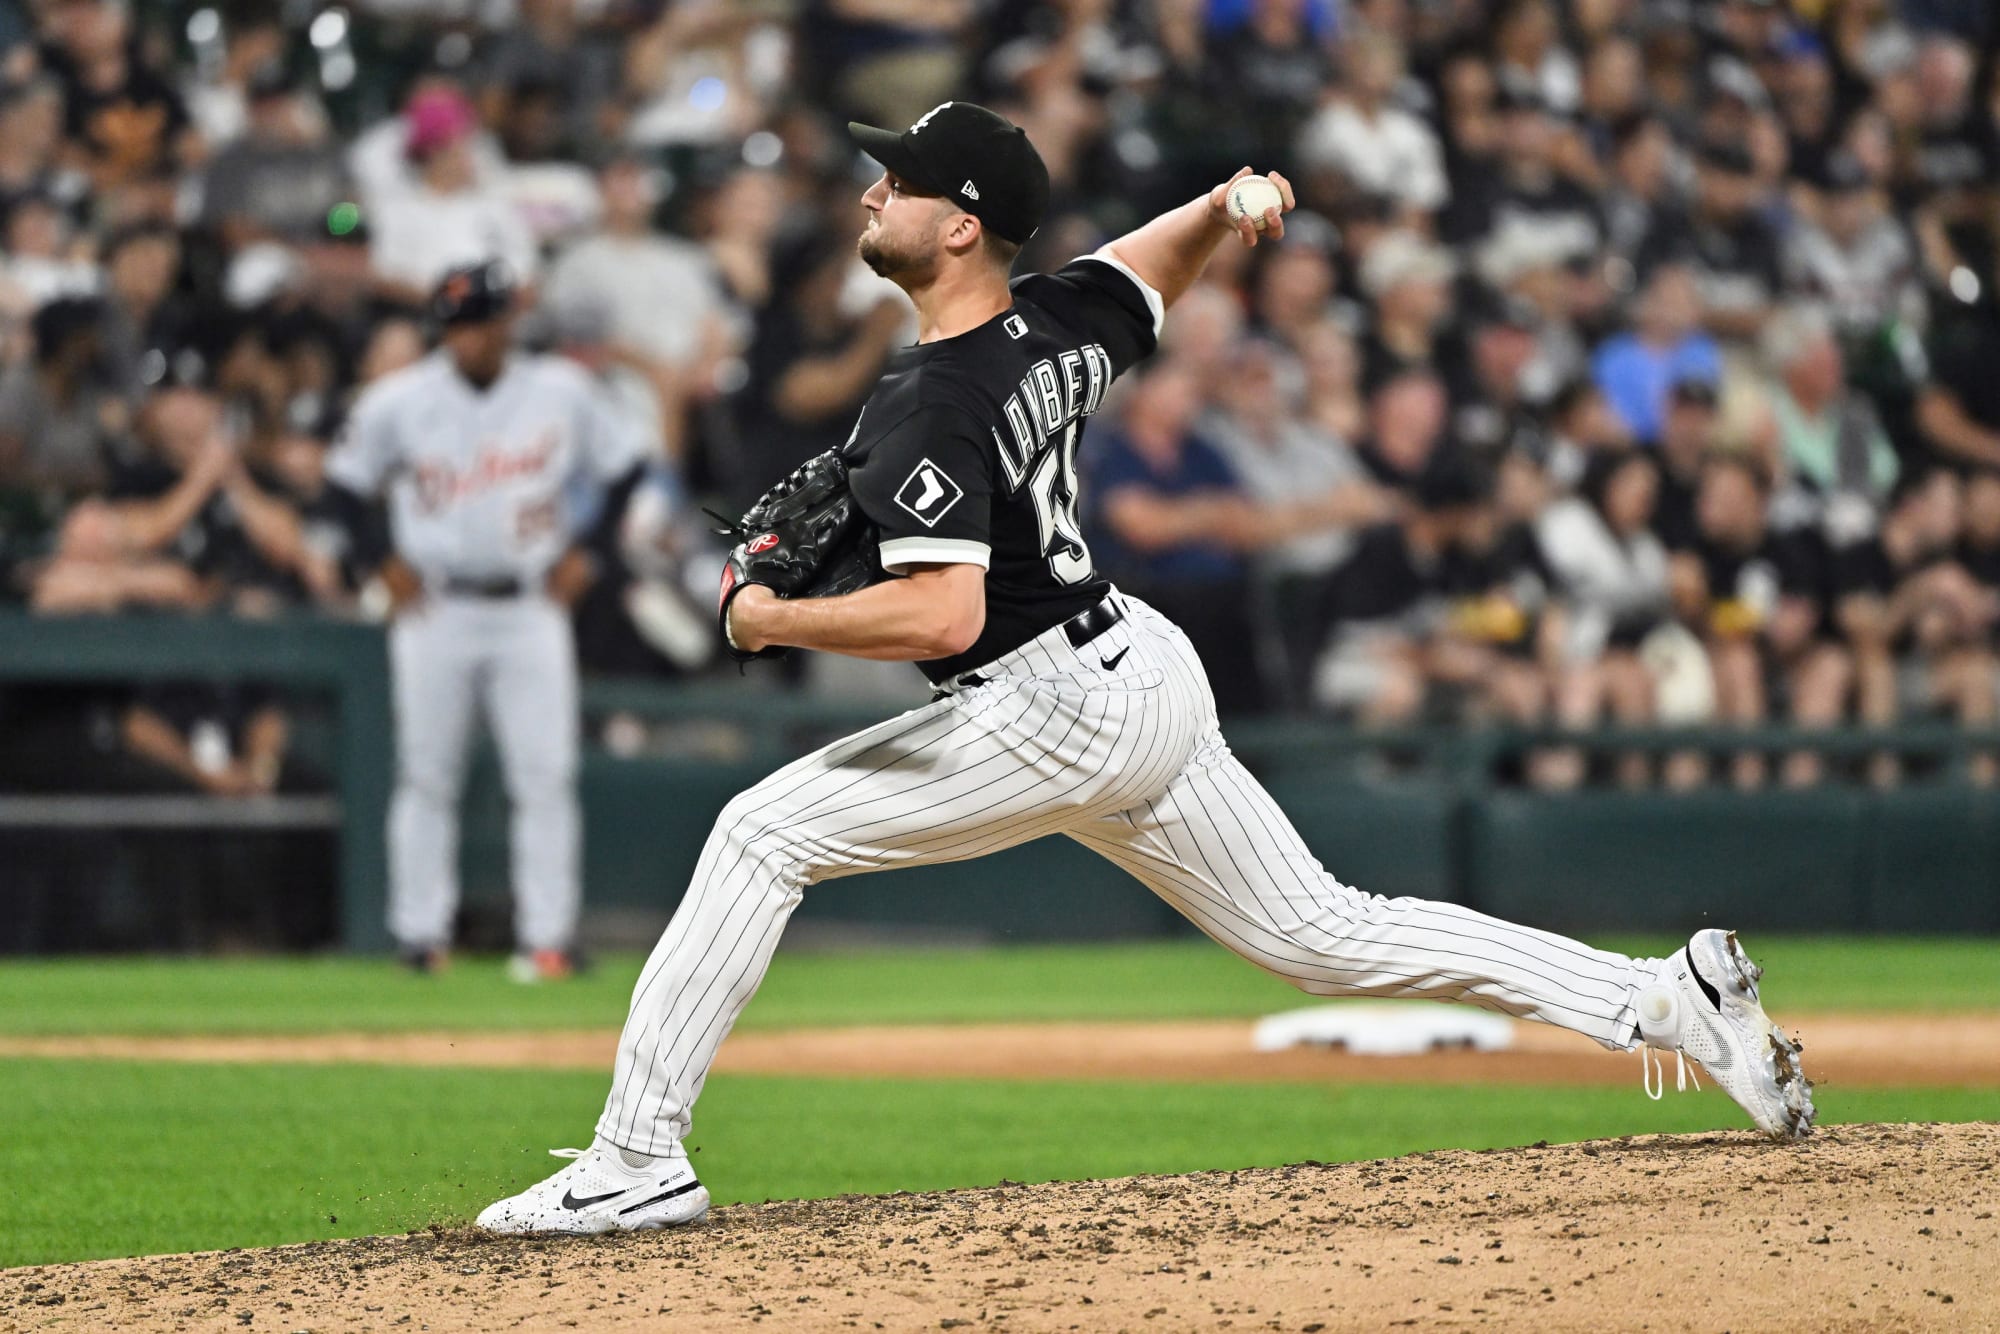 This Chicago White Sox reliever has been incredible lately